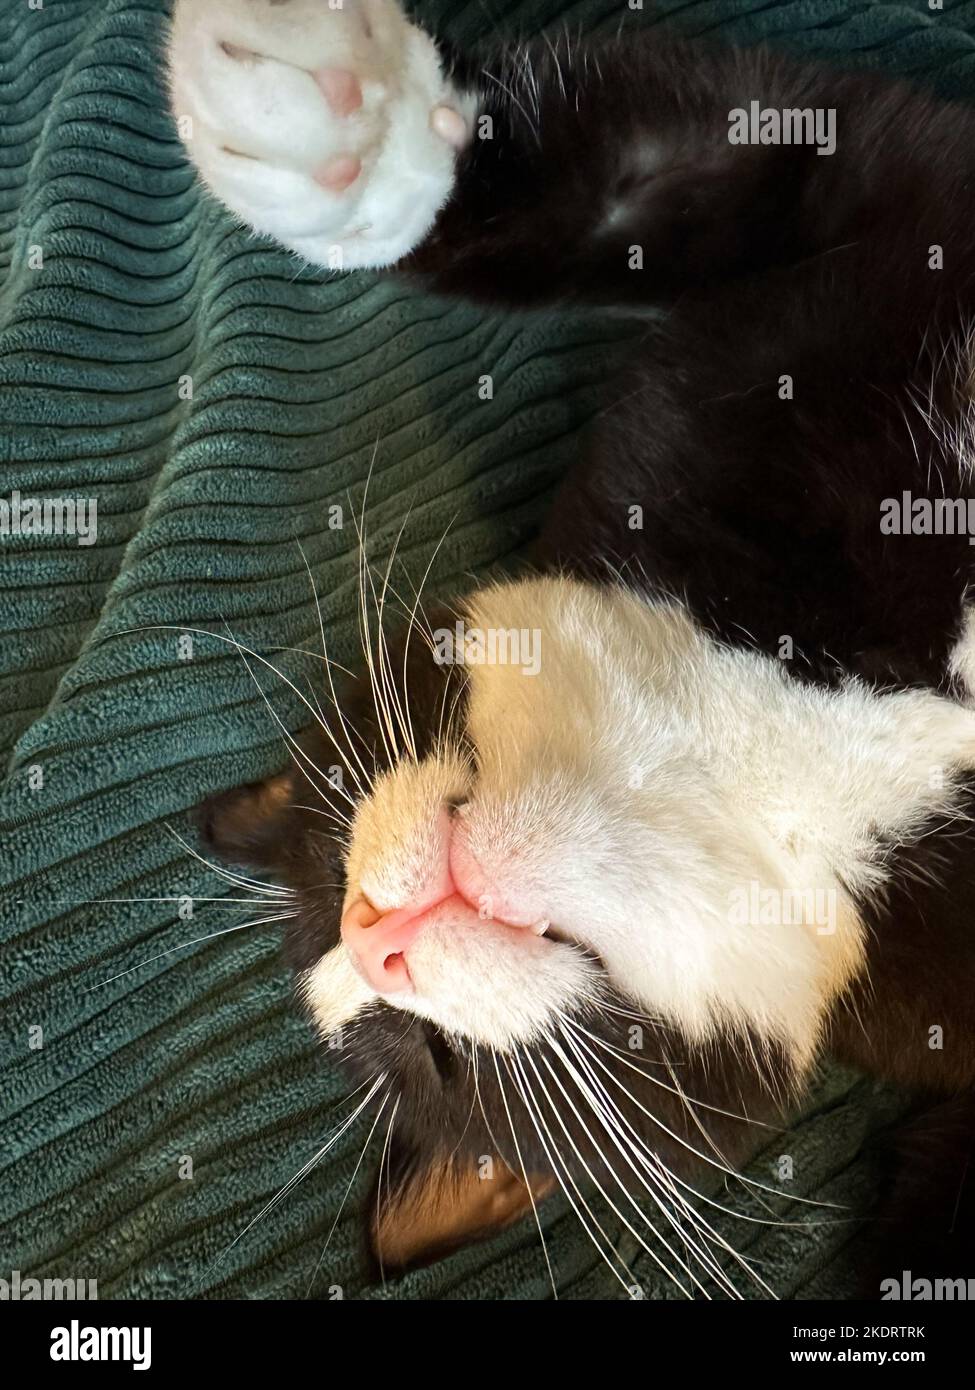 black cat with a white belly and paws is lying with its paws in the air on its back in a green blanket. The cat has visible teeth. Stock Photo